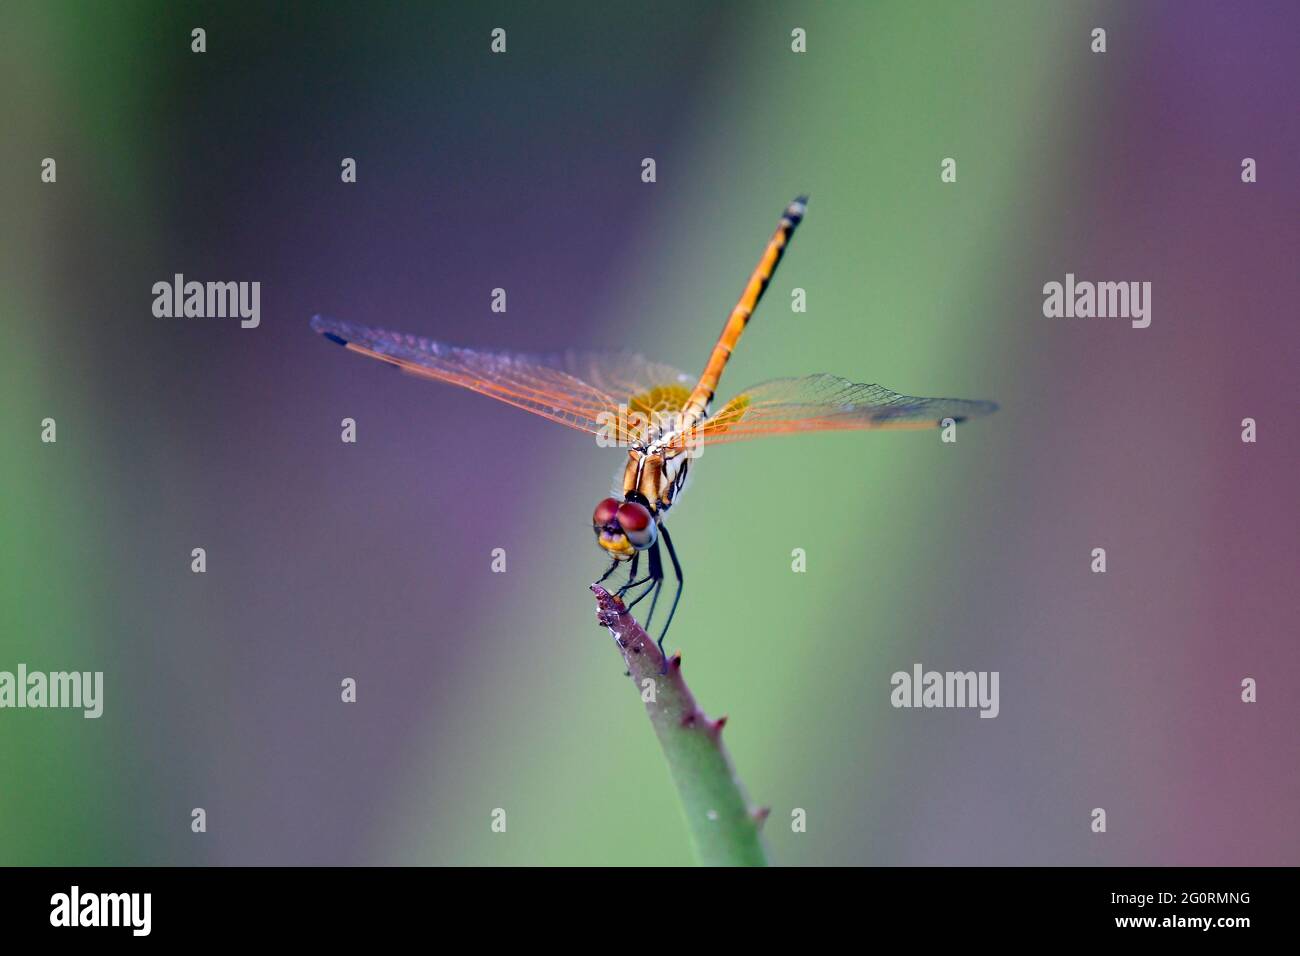 Natural life in Africa. Dragonfly perching on stem against green and purple blurred background Stock Photo